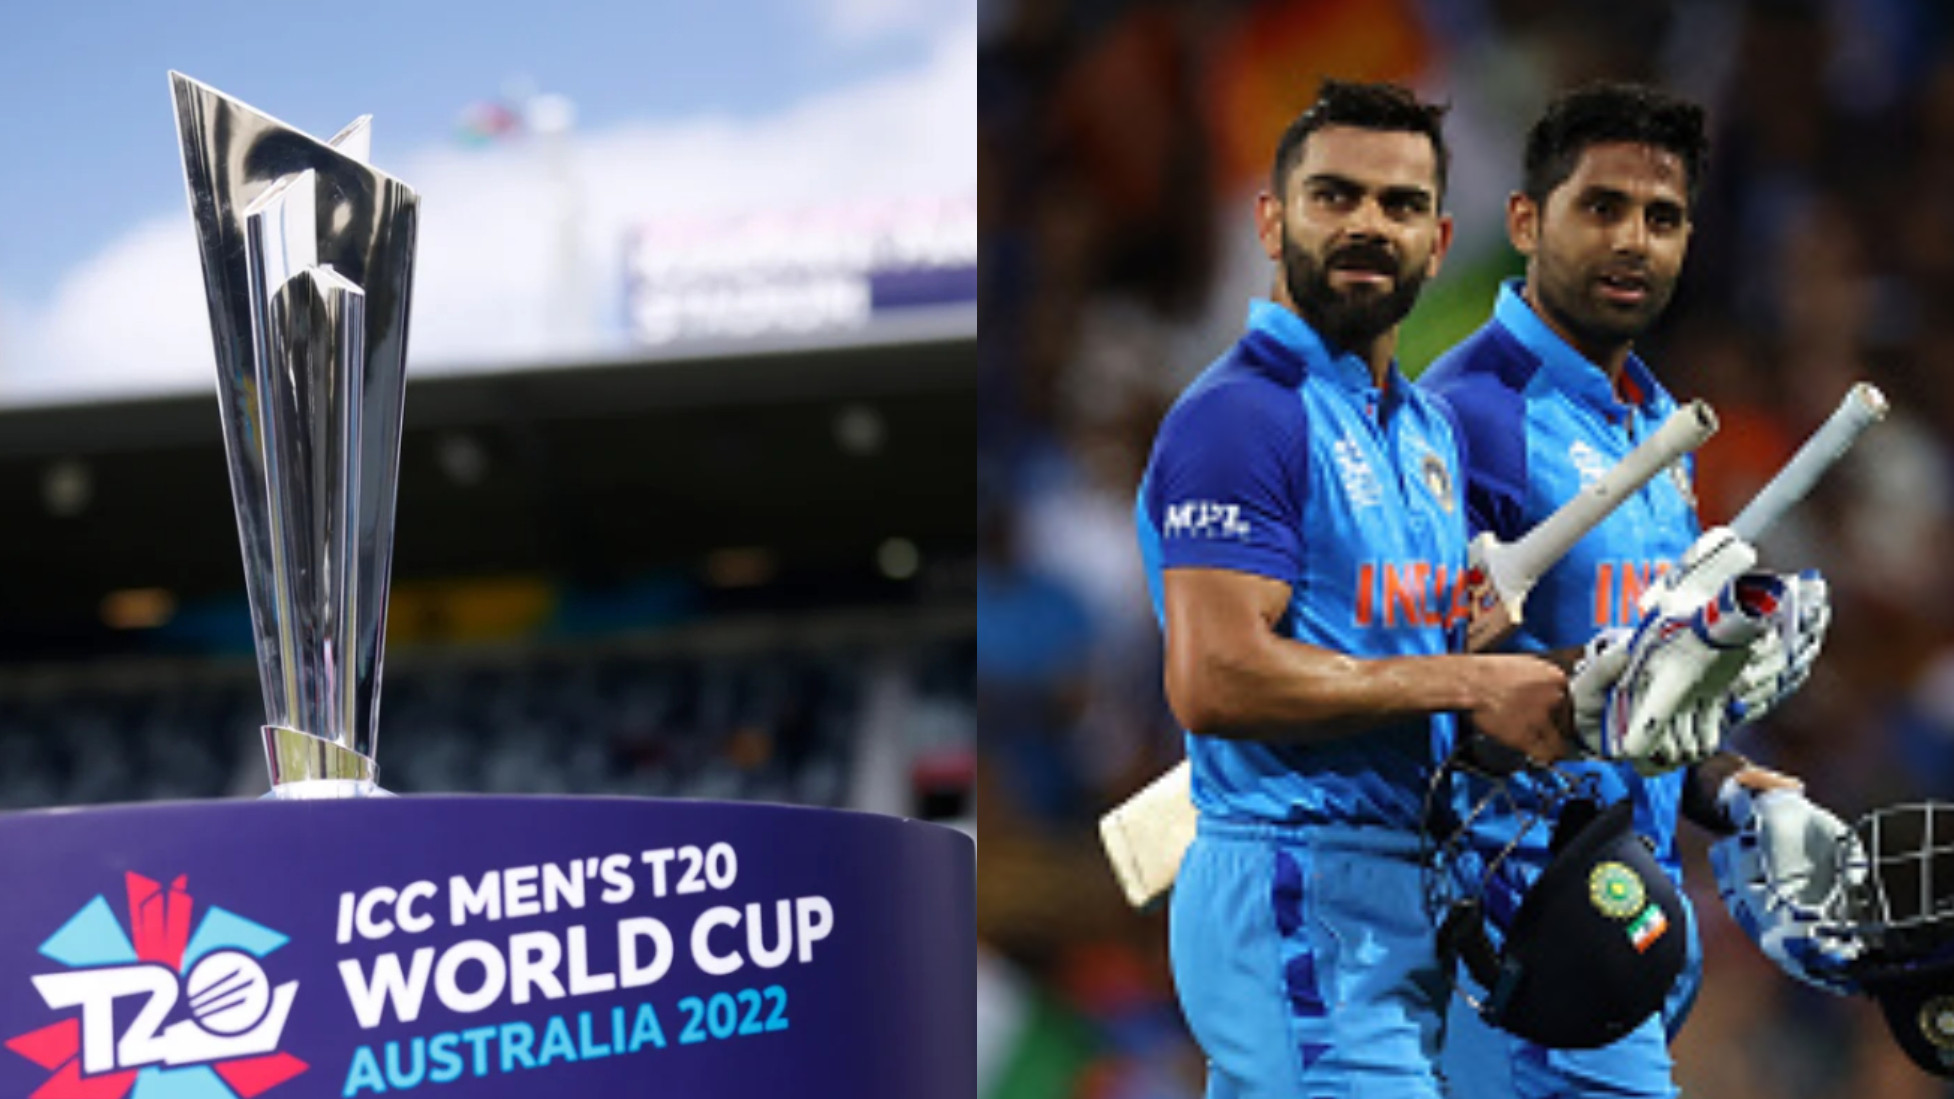 T20 World Cup 2022: Virat Kohli and Suryakumar Yadav named in ICC's ‘Most Valuable Team' of tournament